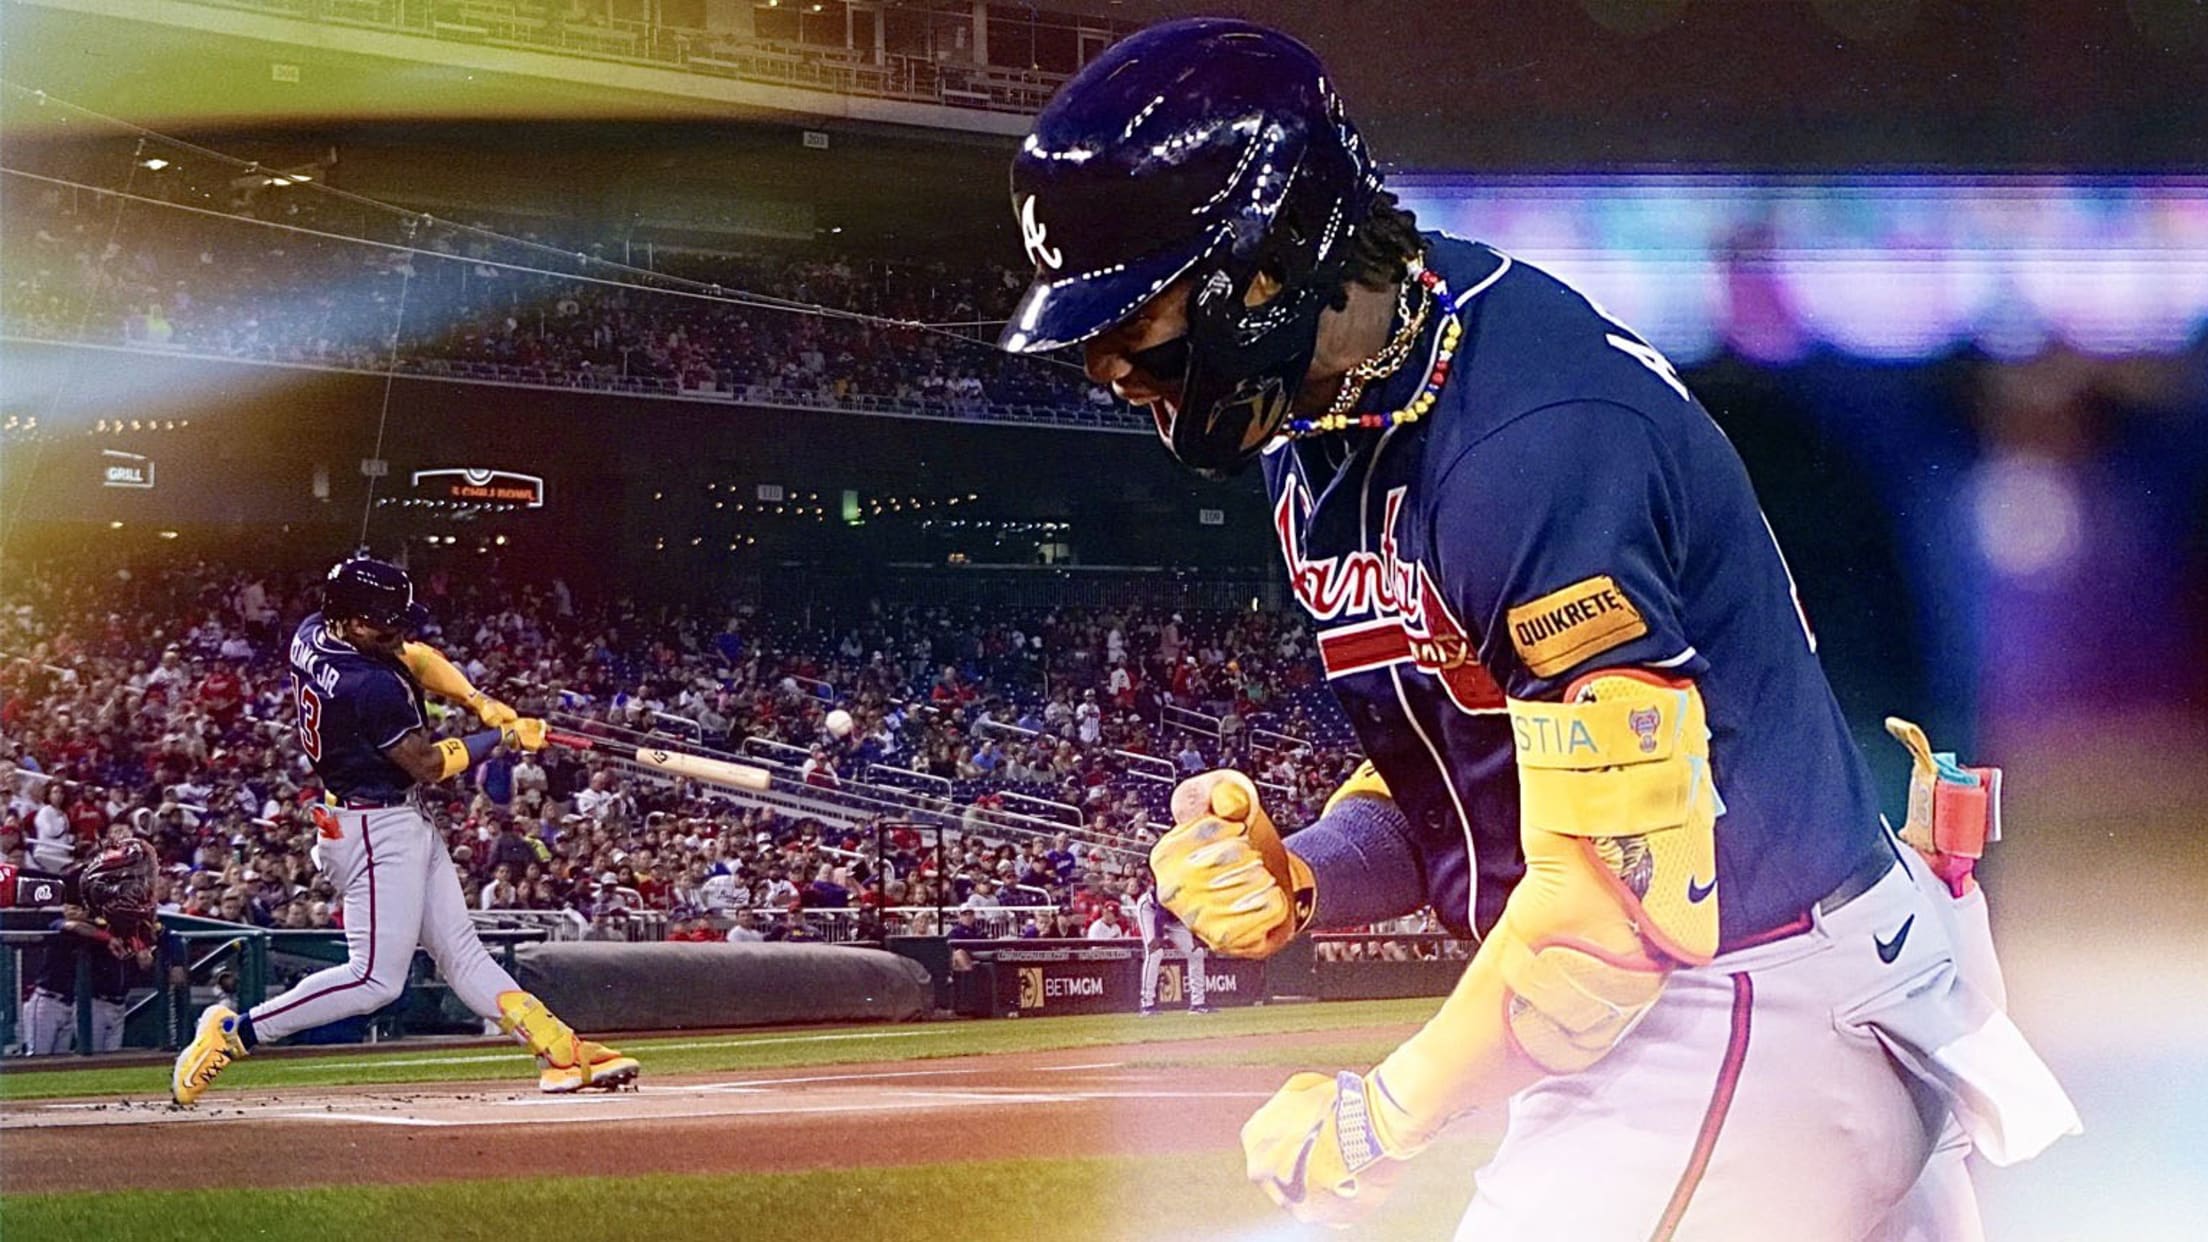 A composite photo of Ronald Acuña Jr. hitting a home run and then pumping his fist as he rounds the bases